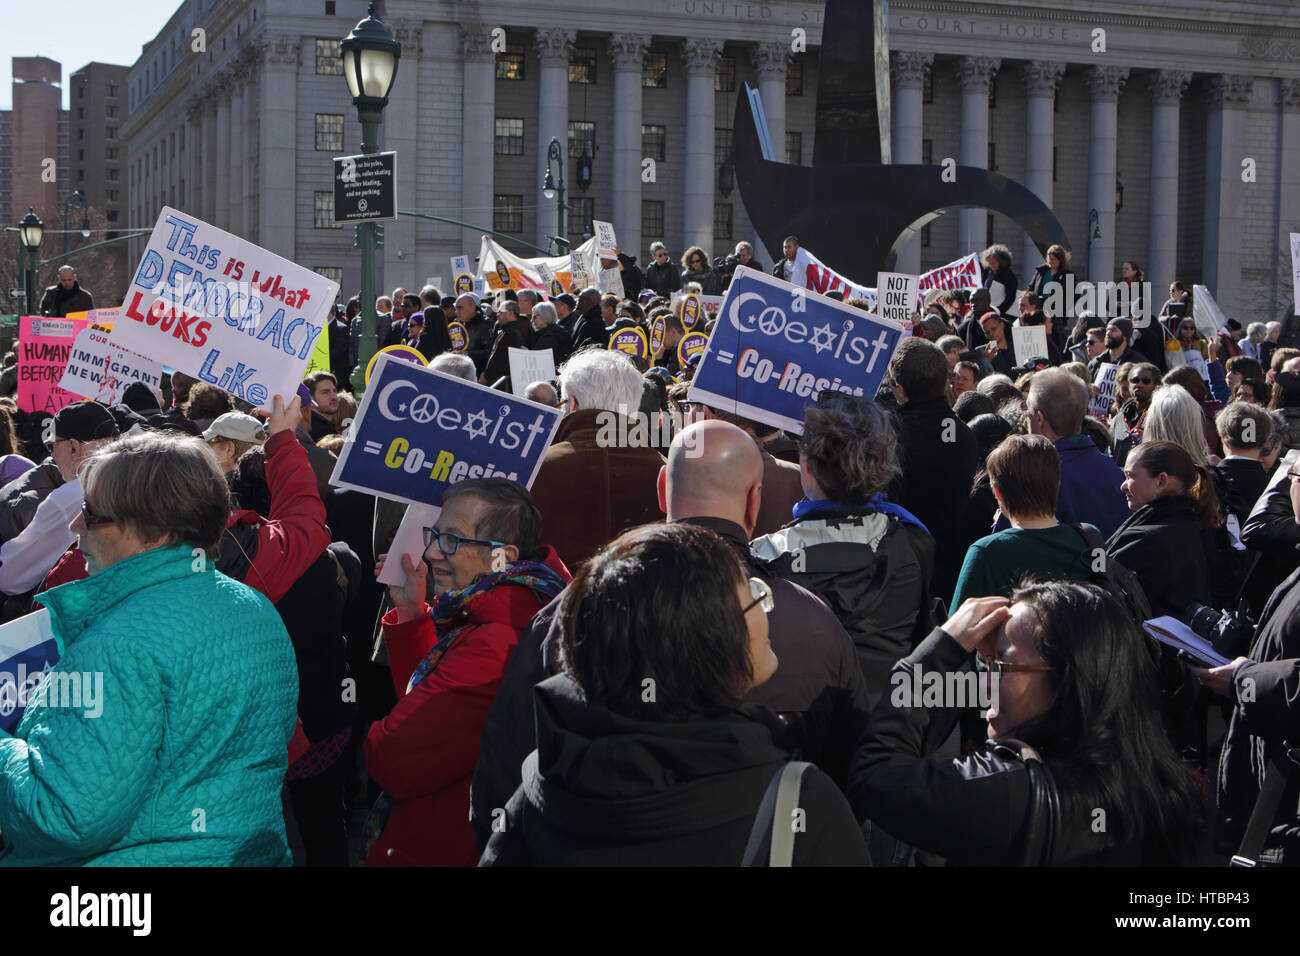 New York, NY, USA - March 9, 2017: A group of about 100 people rally in Foley Square, outside a courthouse in Manhattan, to protest Trump travel ban Stock Photo